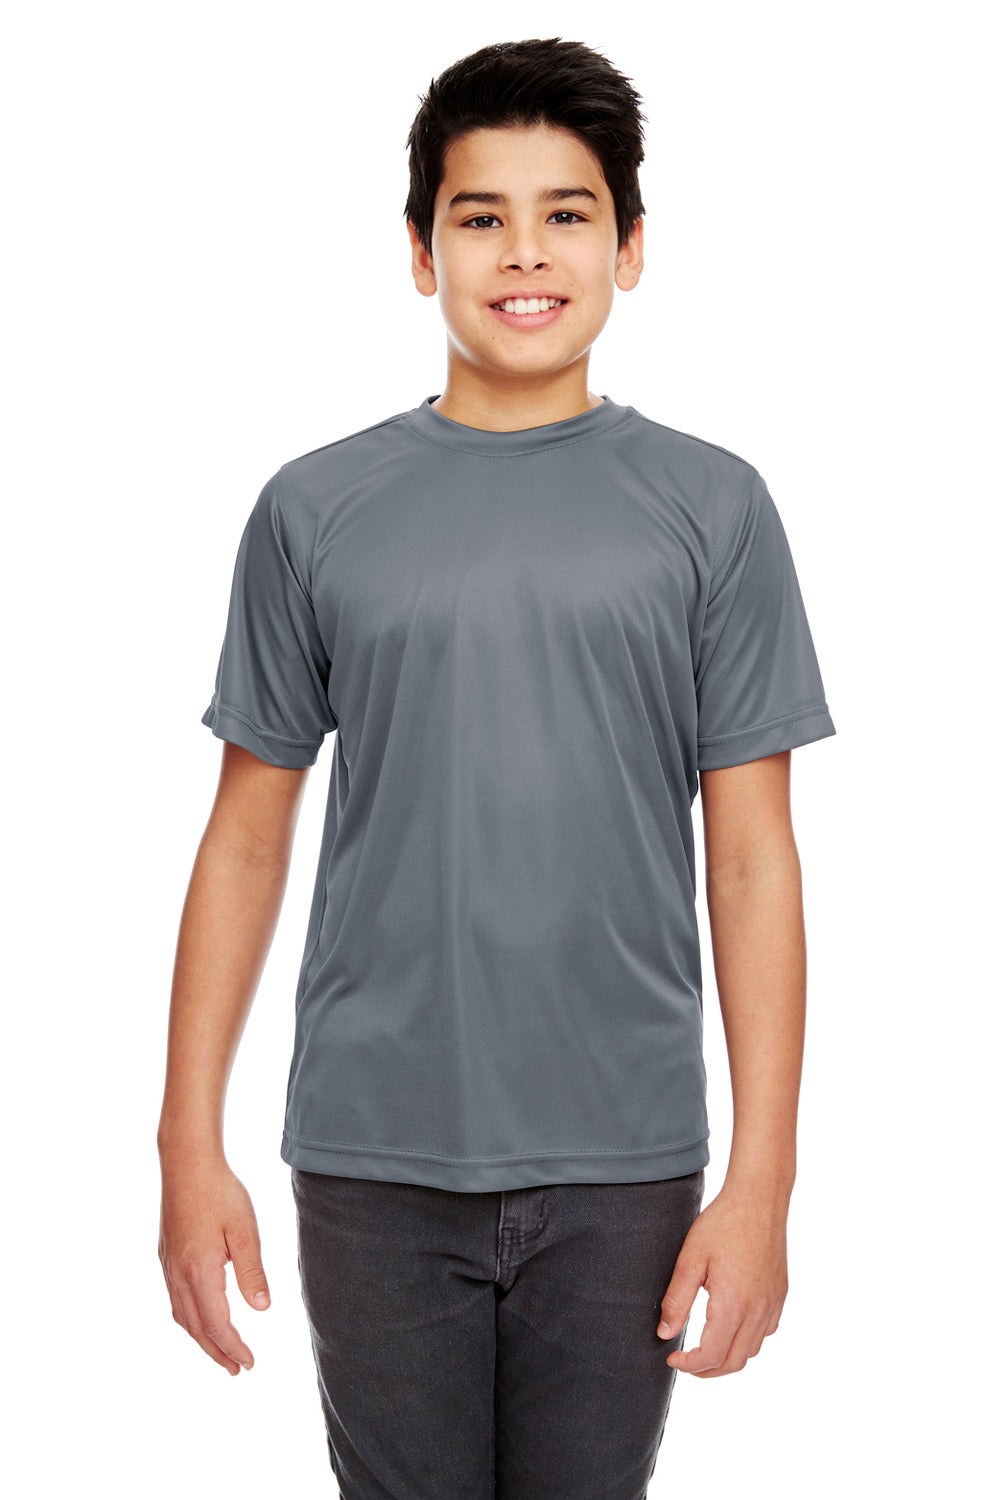 UltraClub 8420Y Youth Cool & Dry Performance Moisture Wicking Short Sleeve Crewneck T-Shirt Charcoal Grey Front